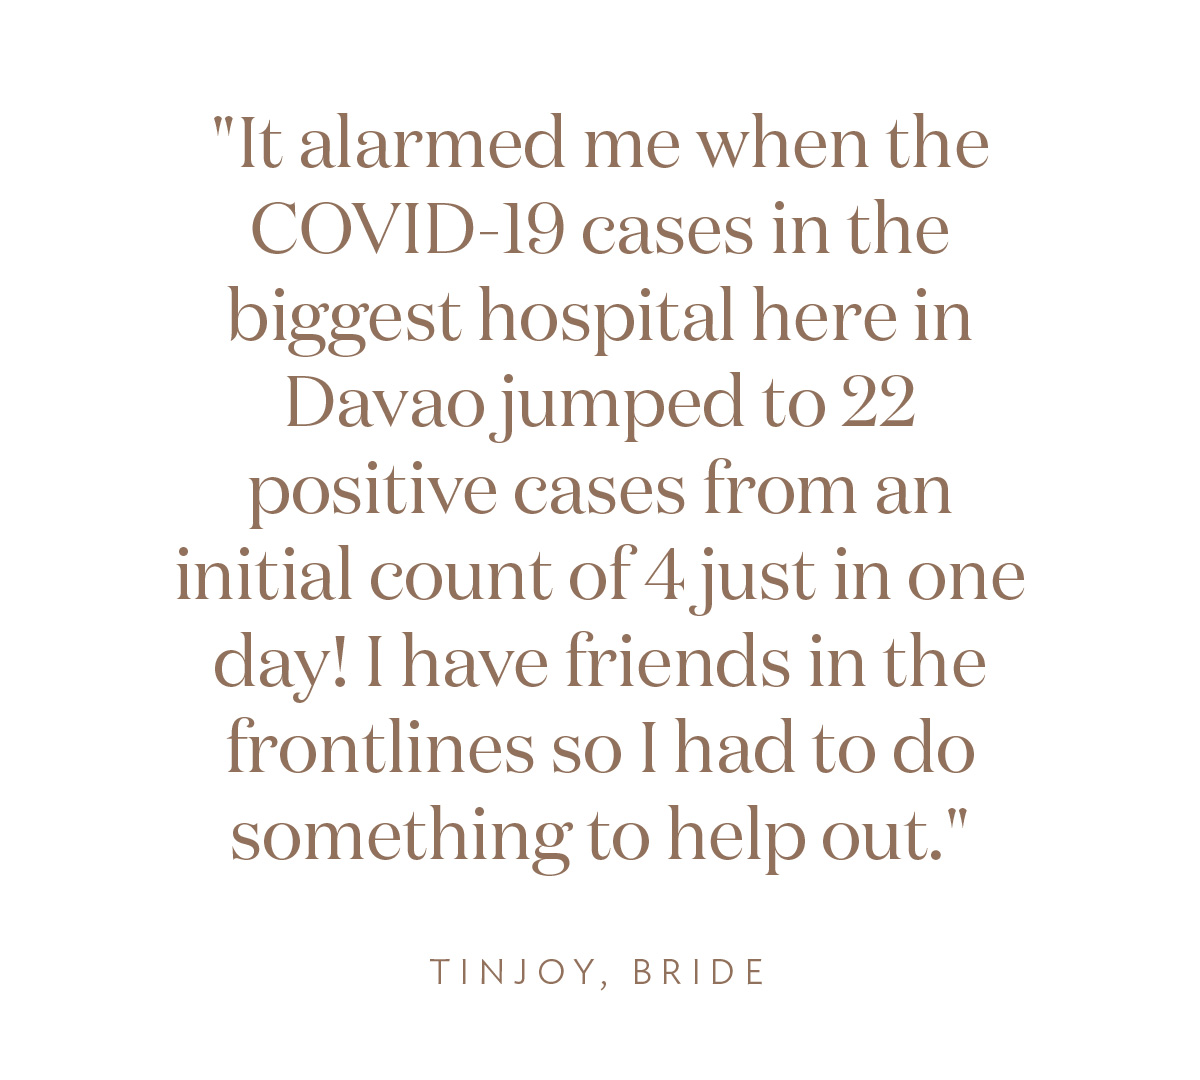 "It alarmed me when the COVID-19 cases in the biggest hospital here in Davao jumped to 22 positive cases from an initial count of 4 just in one day! I have friends in the frontlines so I had to do something to help out." Tinjoy, Bride